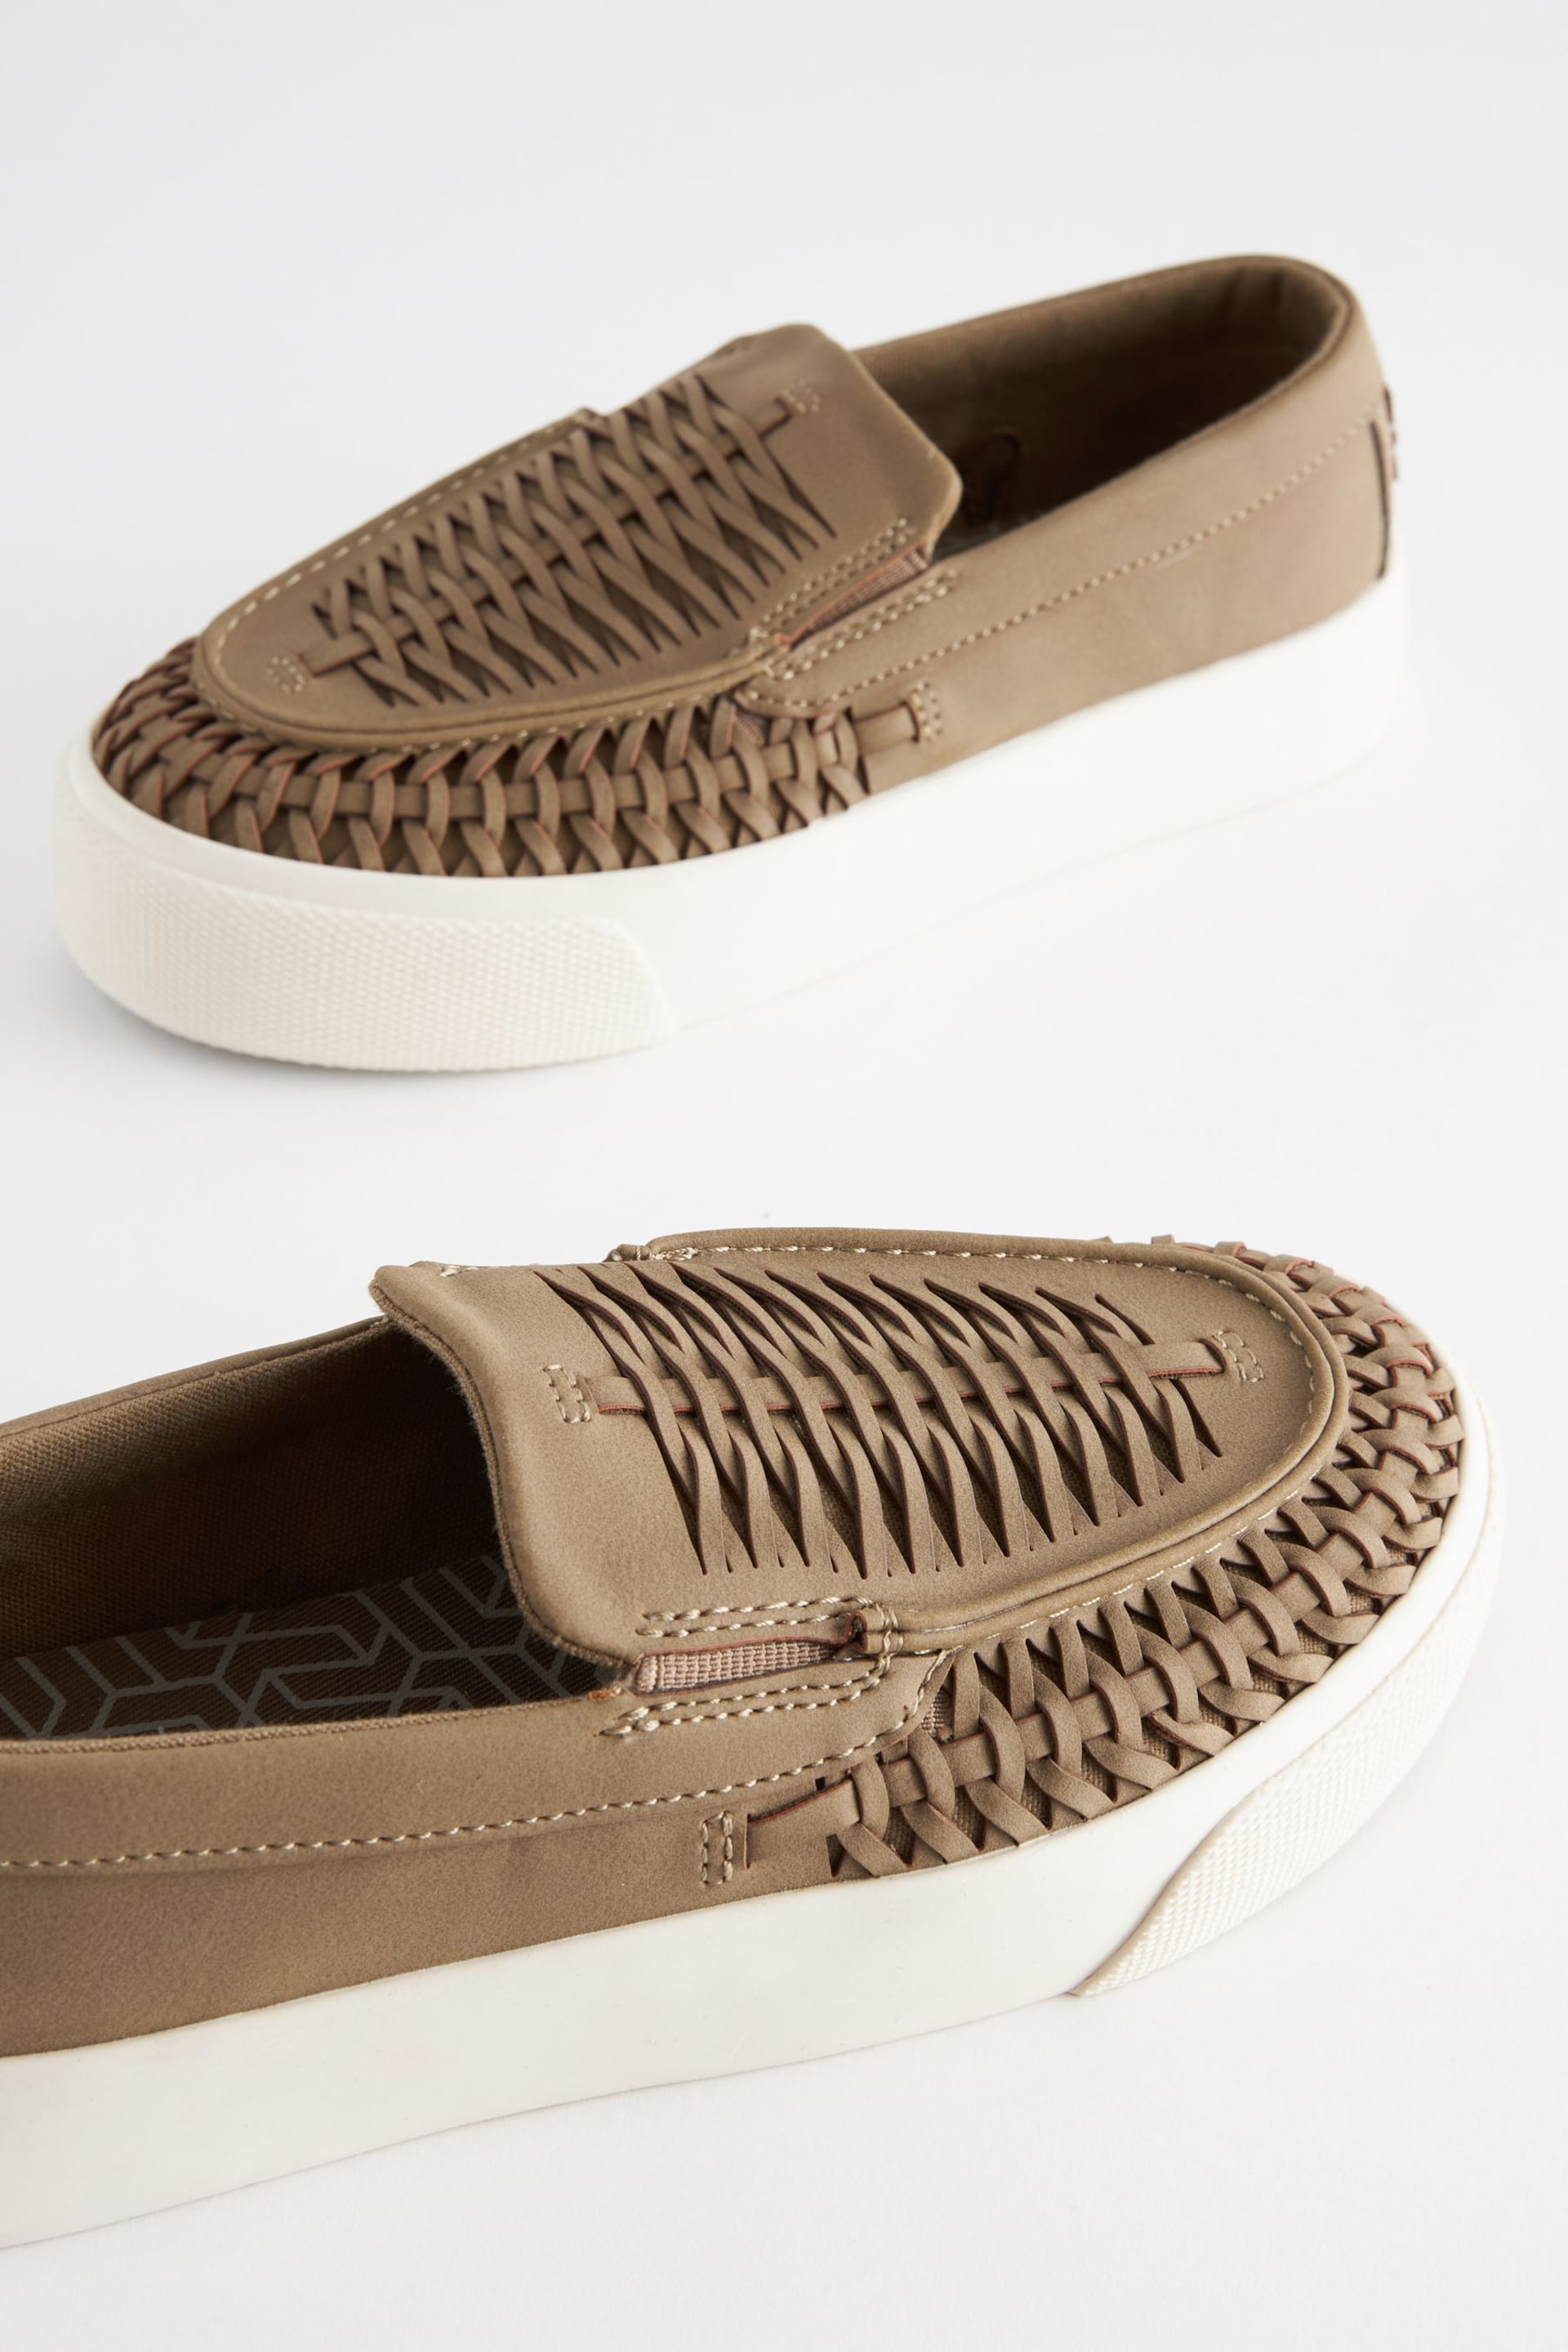 Neutral Woven Loafers - Image 6 of 6